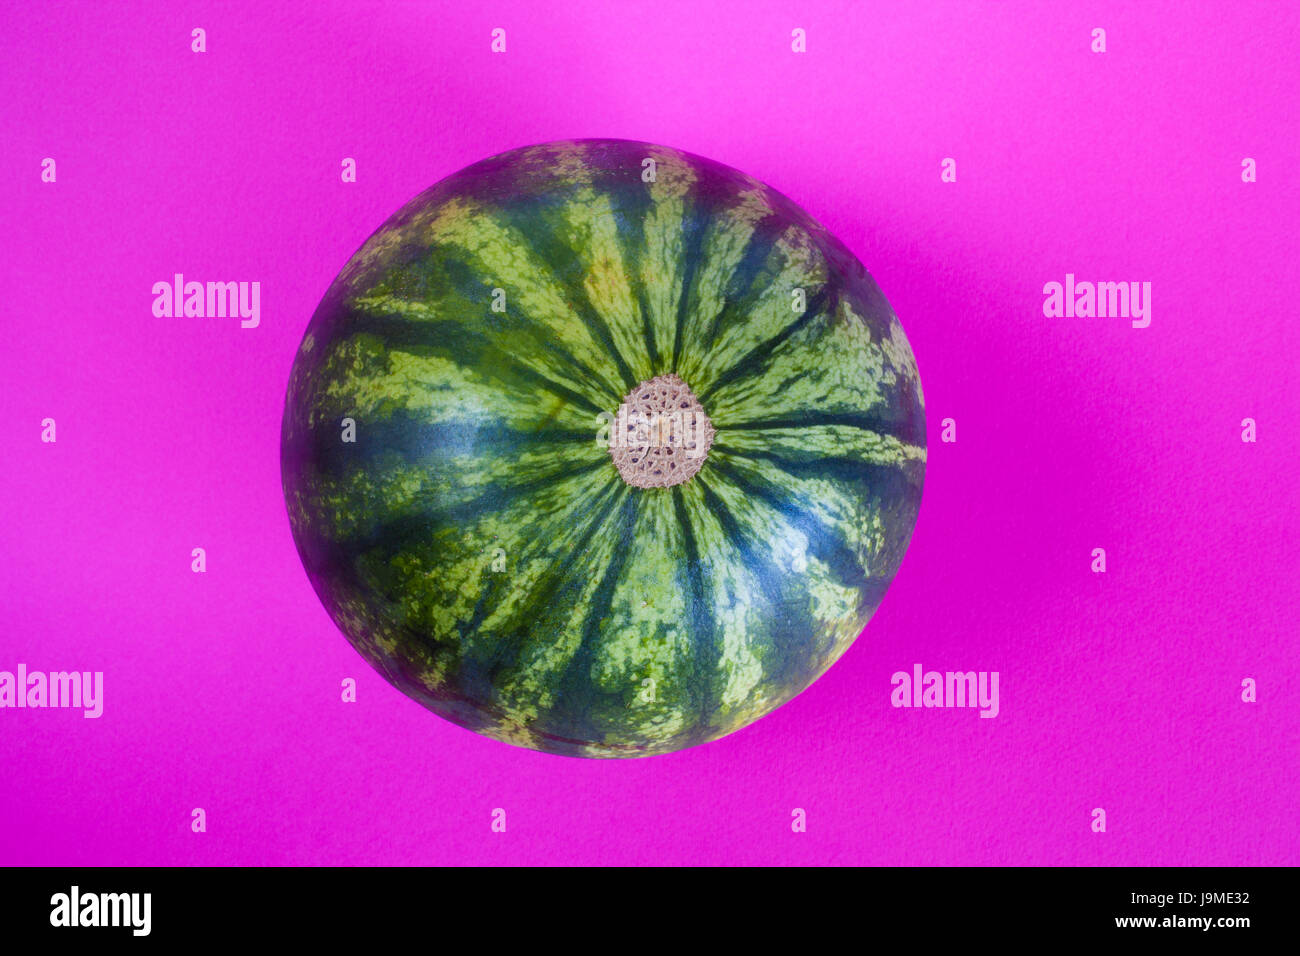 whole watermelon top view on purple background. Stock Photo